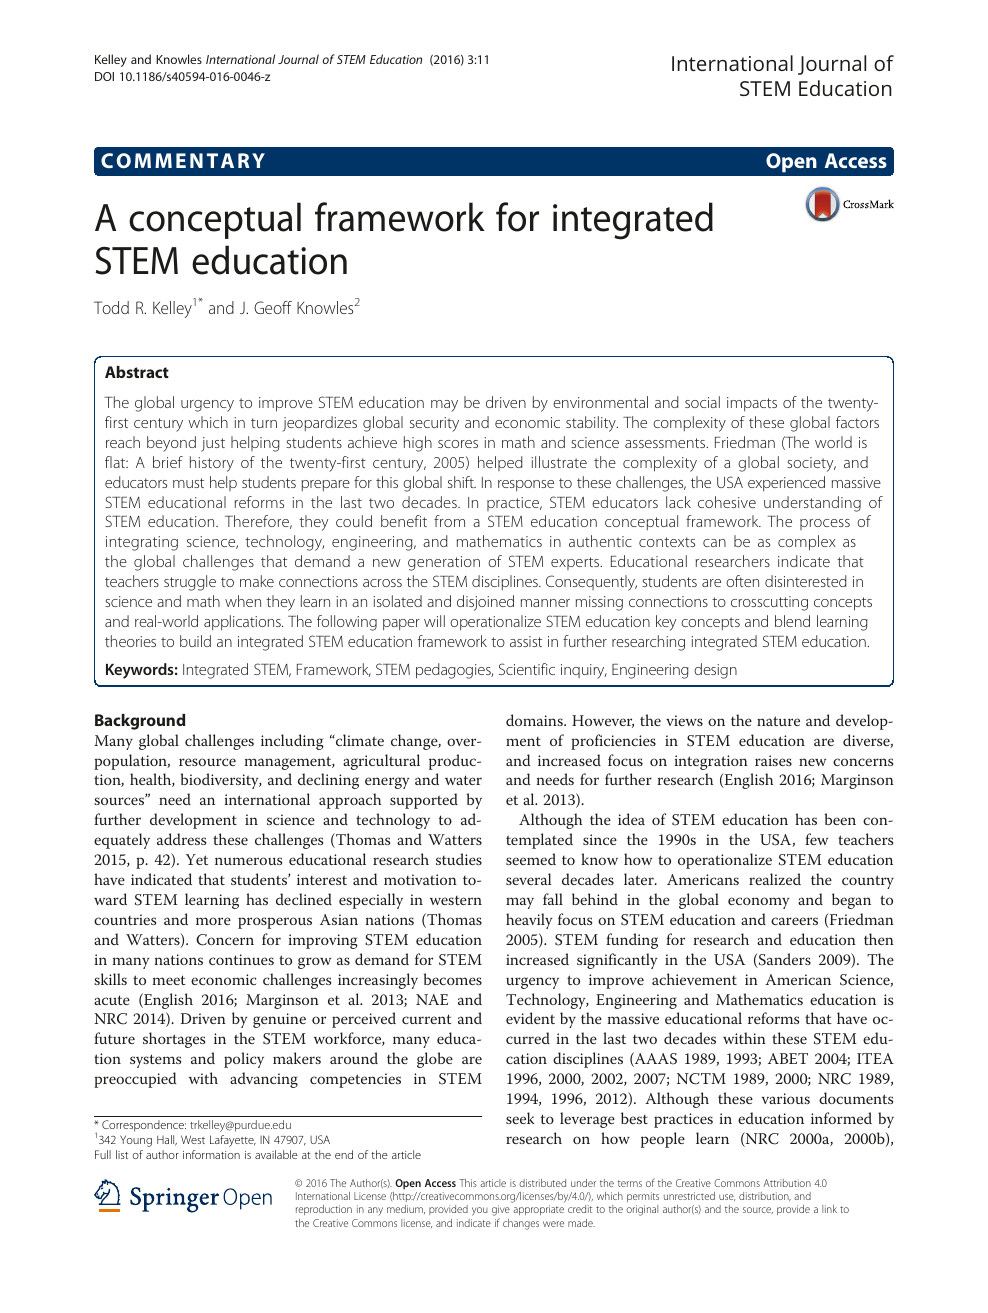 A Conceptual Framework For Integrated Stem Education Topic Of Research Paper In Educational Sciences Download Scholarly Article Pdf And Read For Free On Cyberleninka Open Science Hub